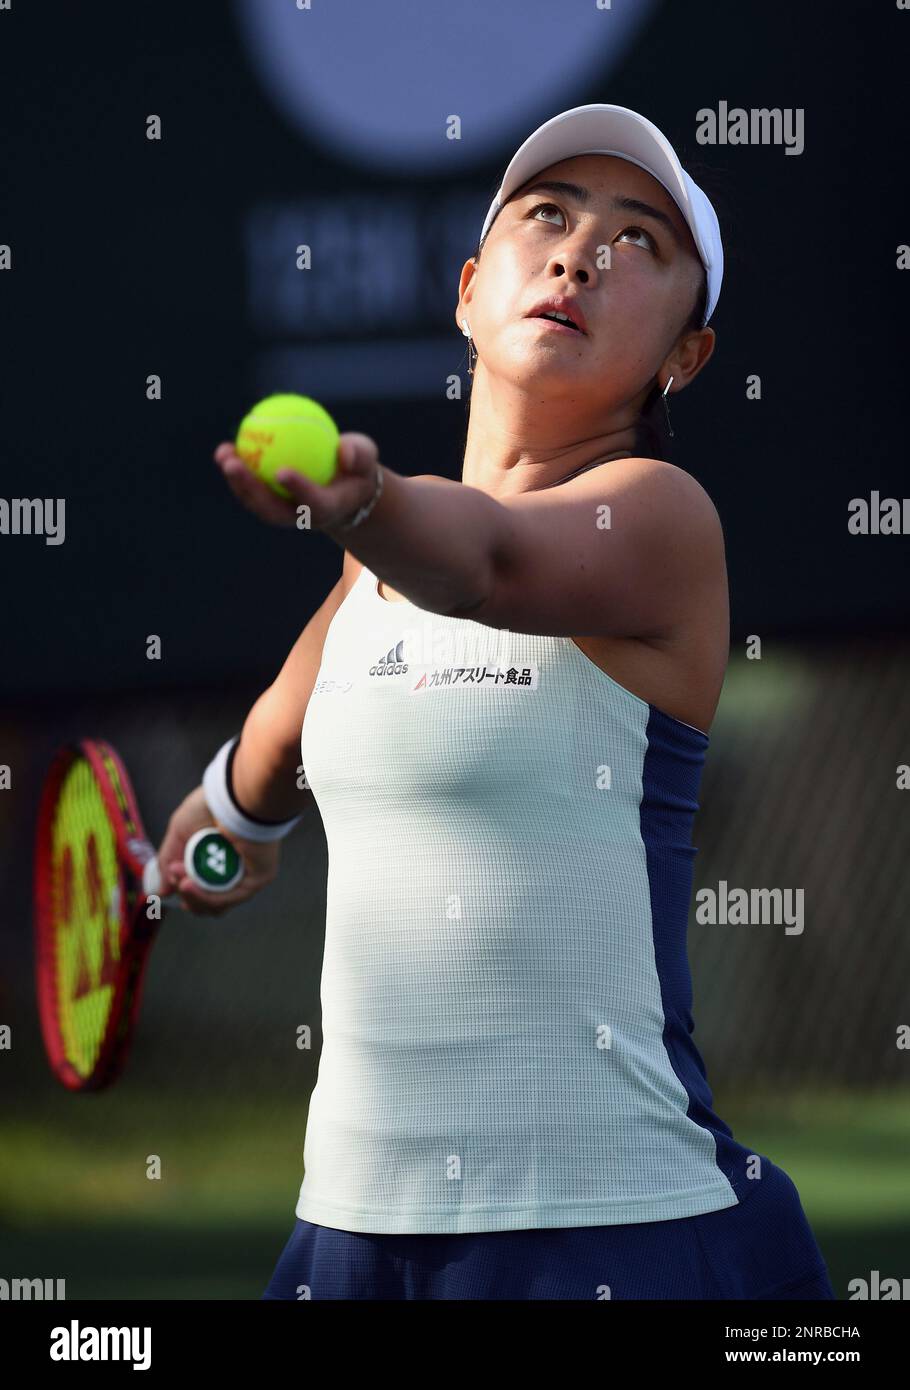 NEWPORT BEACH, CA - JANUARY 27: WTA tennis player Era Hozumi (JPN) returns  a shot during the first round of the Oracle Challenger Series tennis  tournament played on January 27, 2020 at